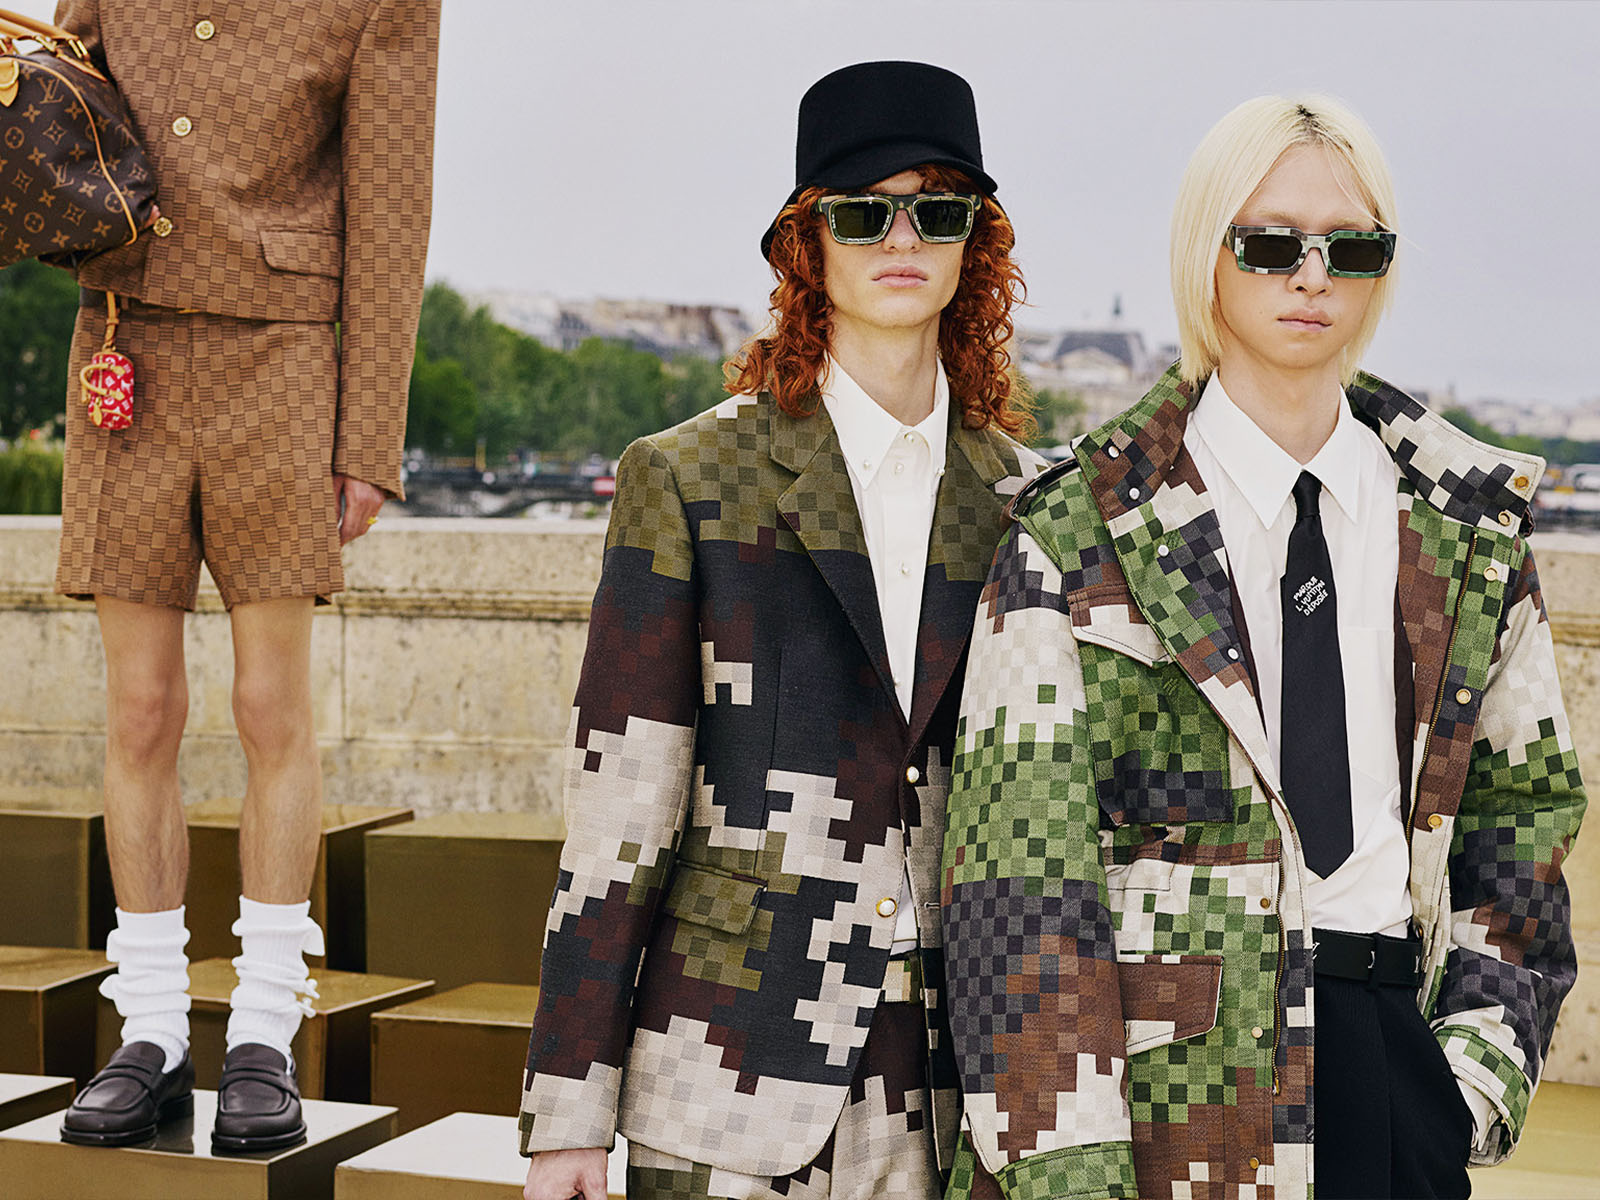 Louis Vuitton models with matching checkered ensemble